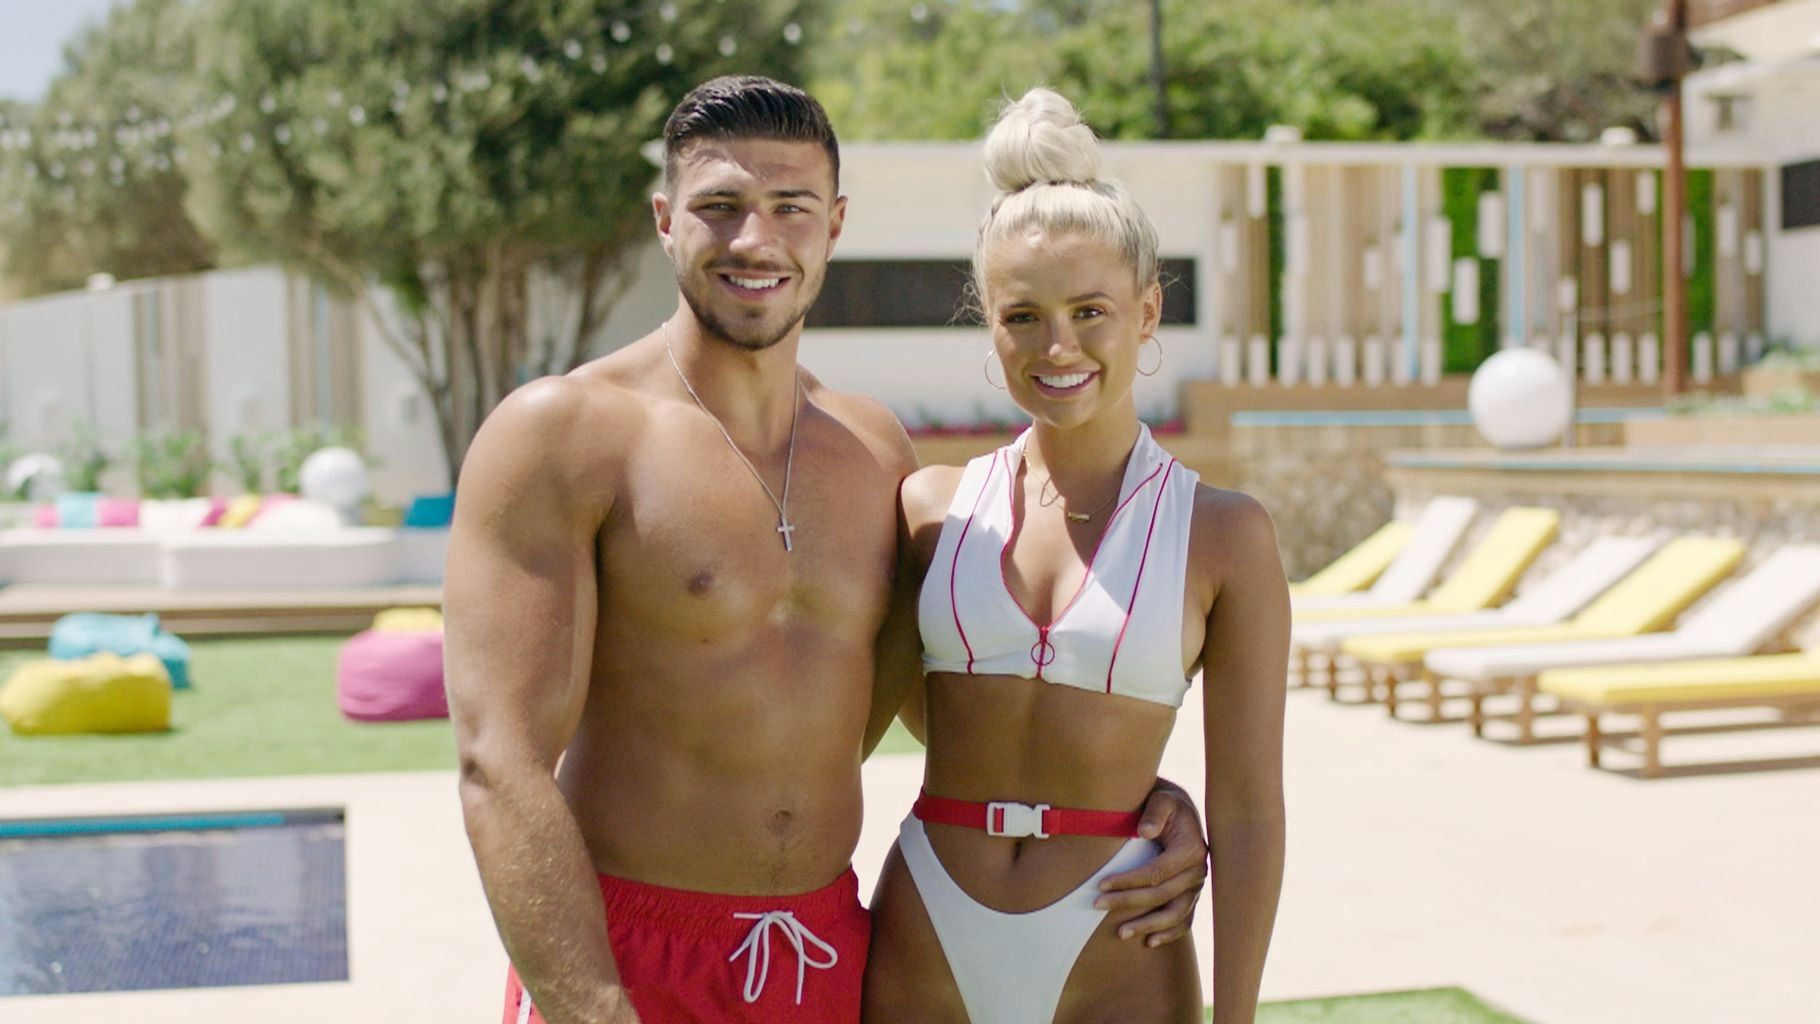 Love Island's Molly-Mae Hague returns to UK after Barbados trip